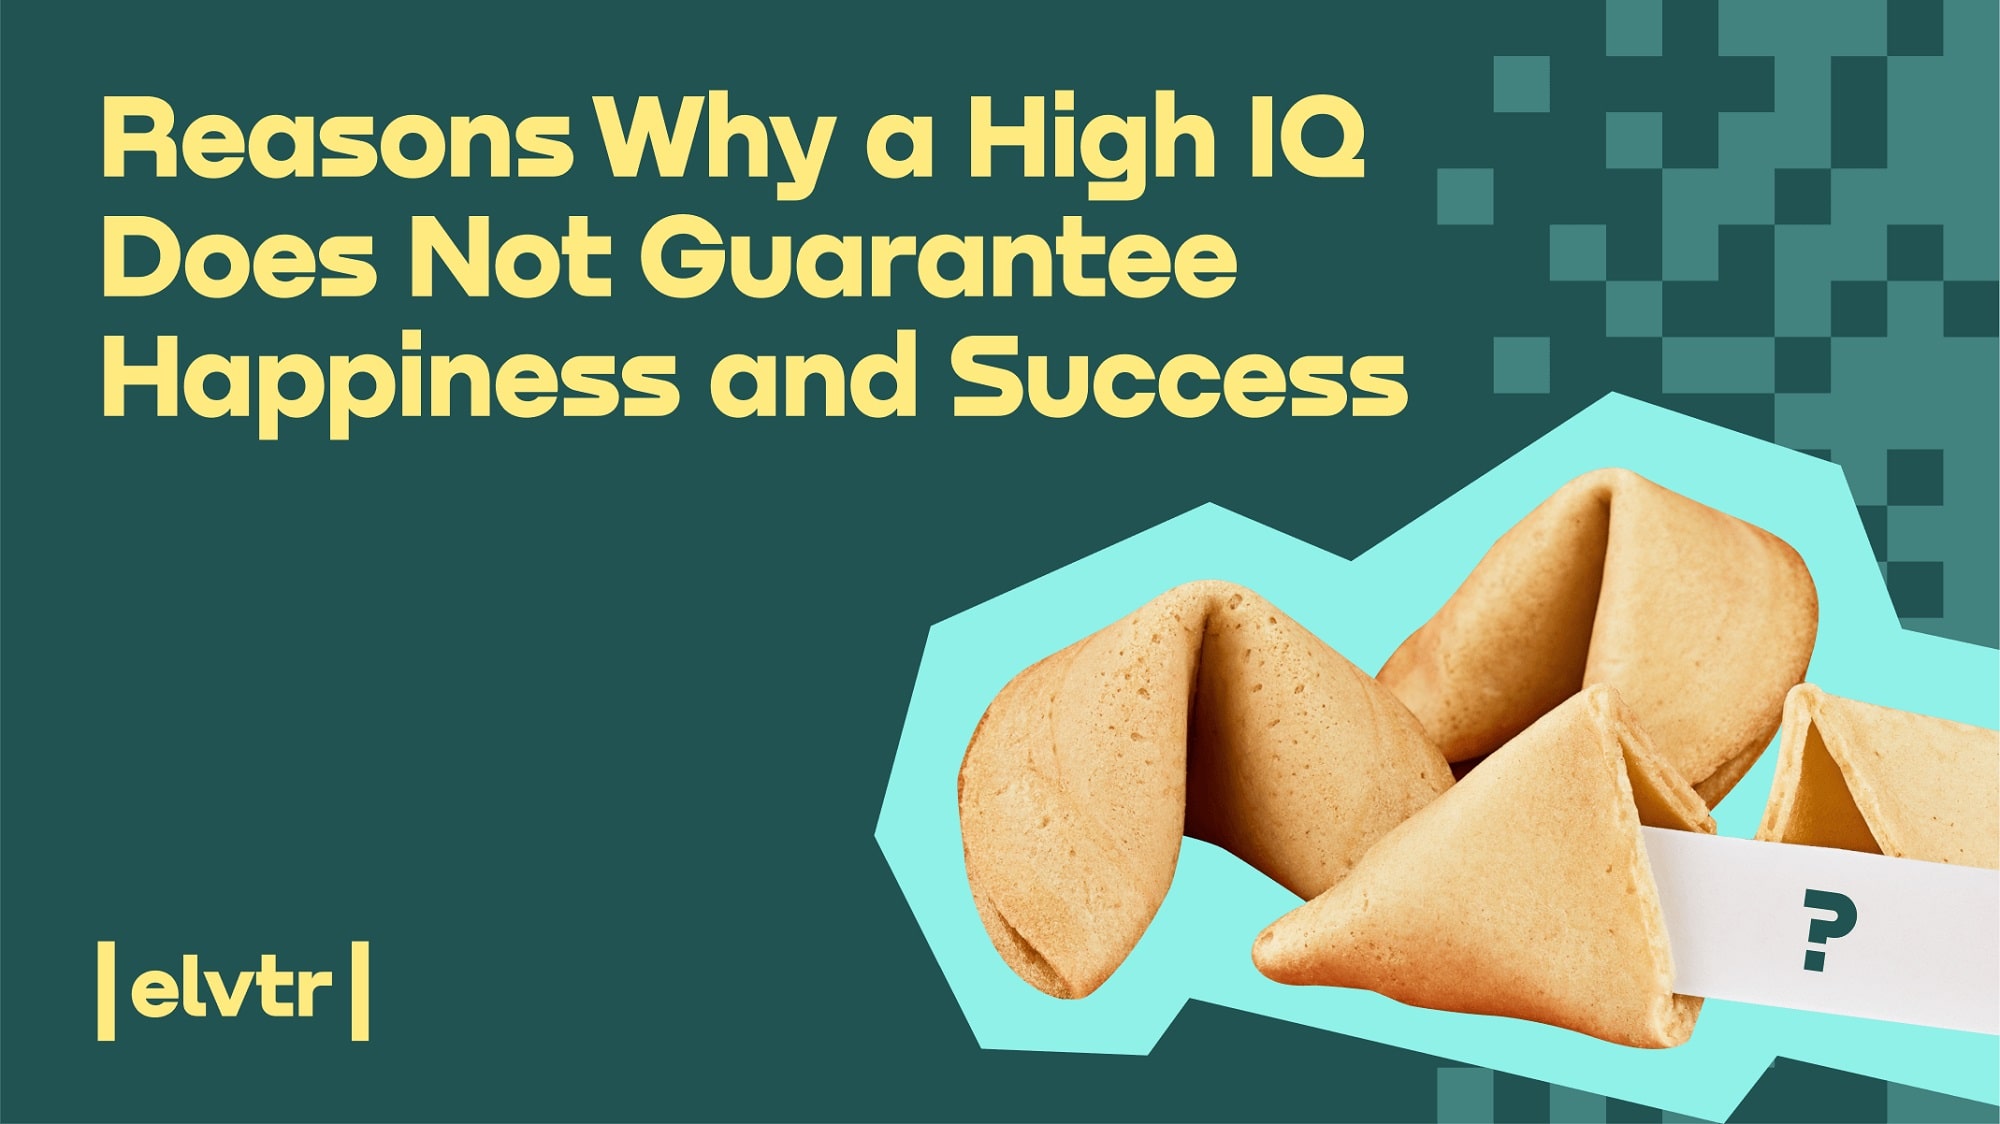 Reasons Why a High IQ Does Not Guarantee Happiness and Success image